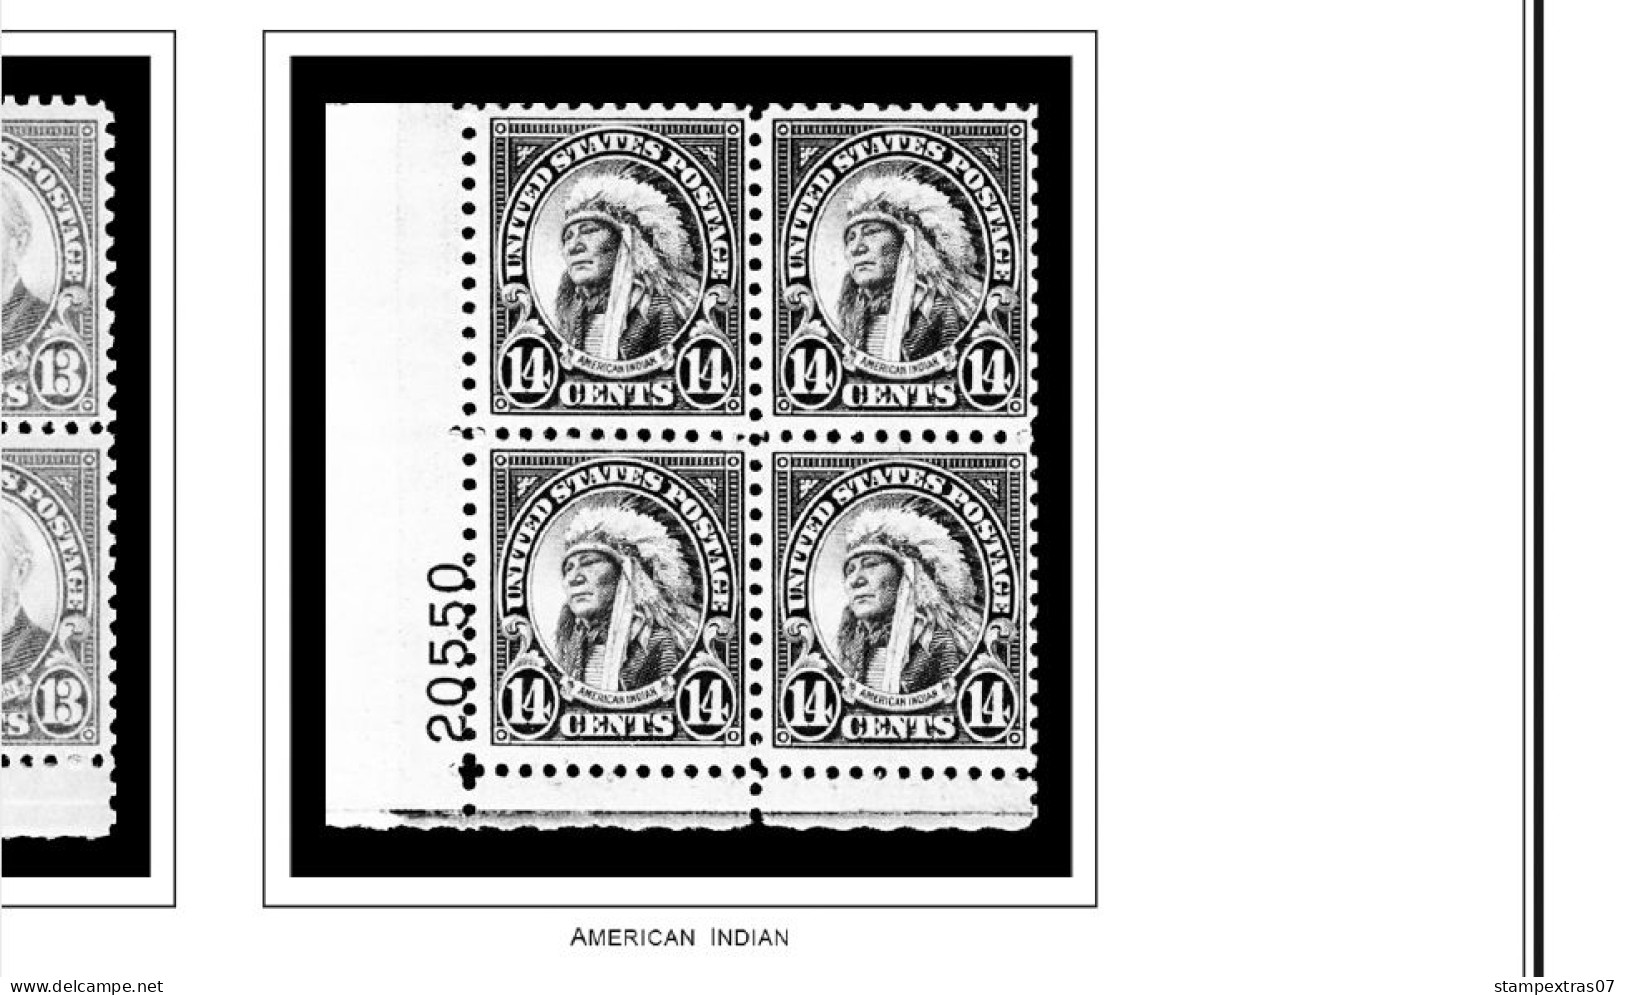 US 1930-1939 PLATE BLOCKS STAMP ALBUM PAGES (47 B&w Illustrated Pages) - Anglais